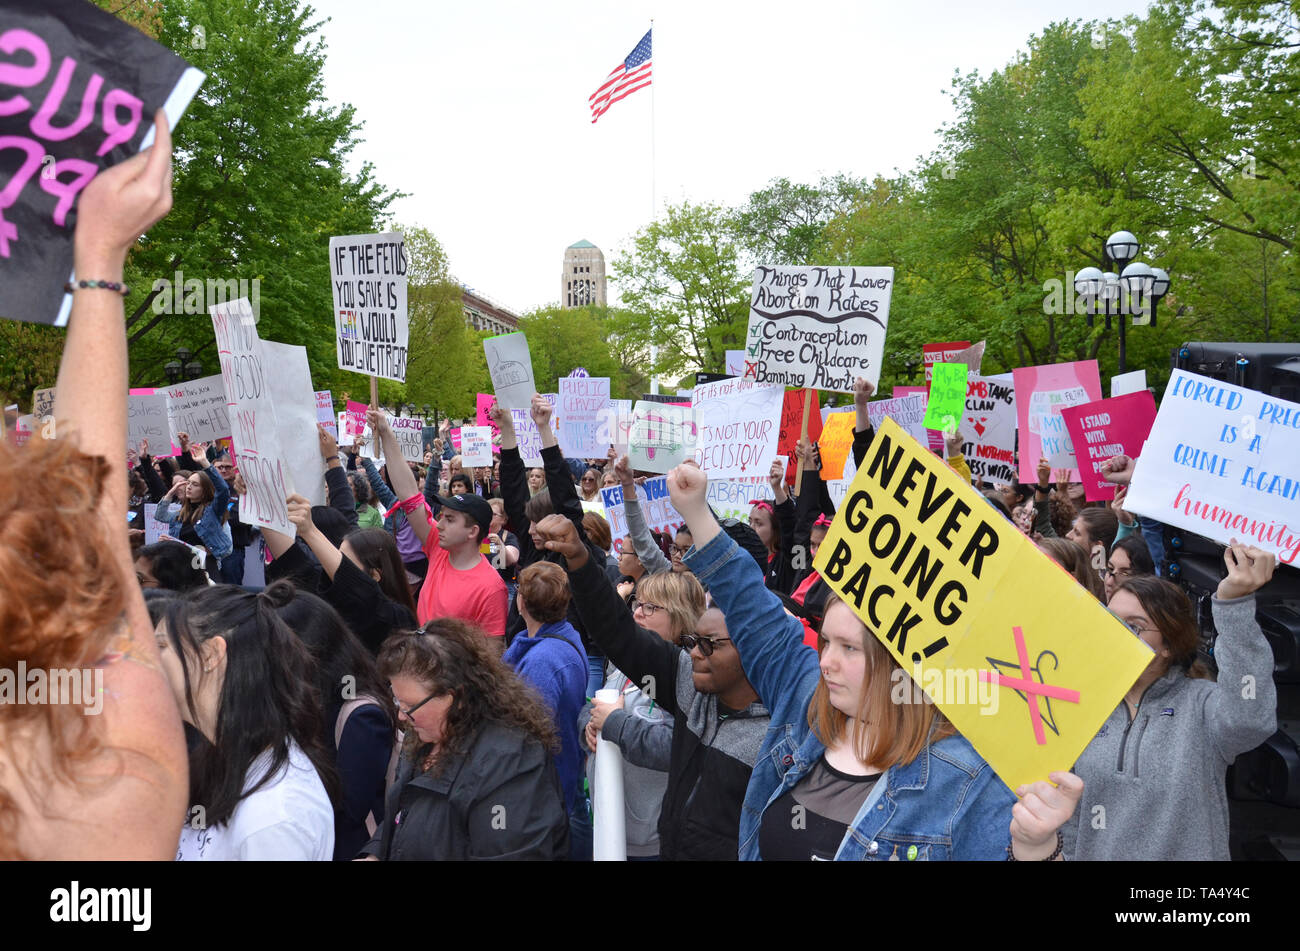 ANN ARBOR, MI/USA - MAY 21, 2019: Protesters display sign at the Ann Arbor Stop the Bans protest organized by Planned Parenthood. Stock Photo